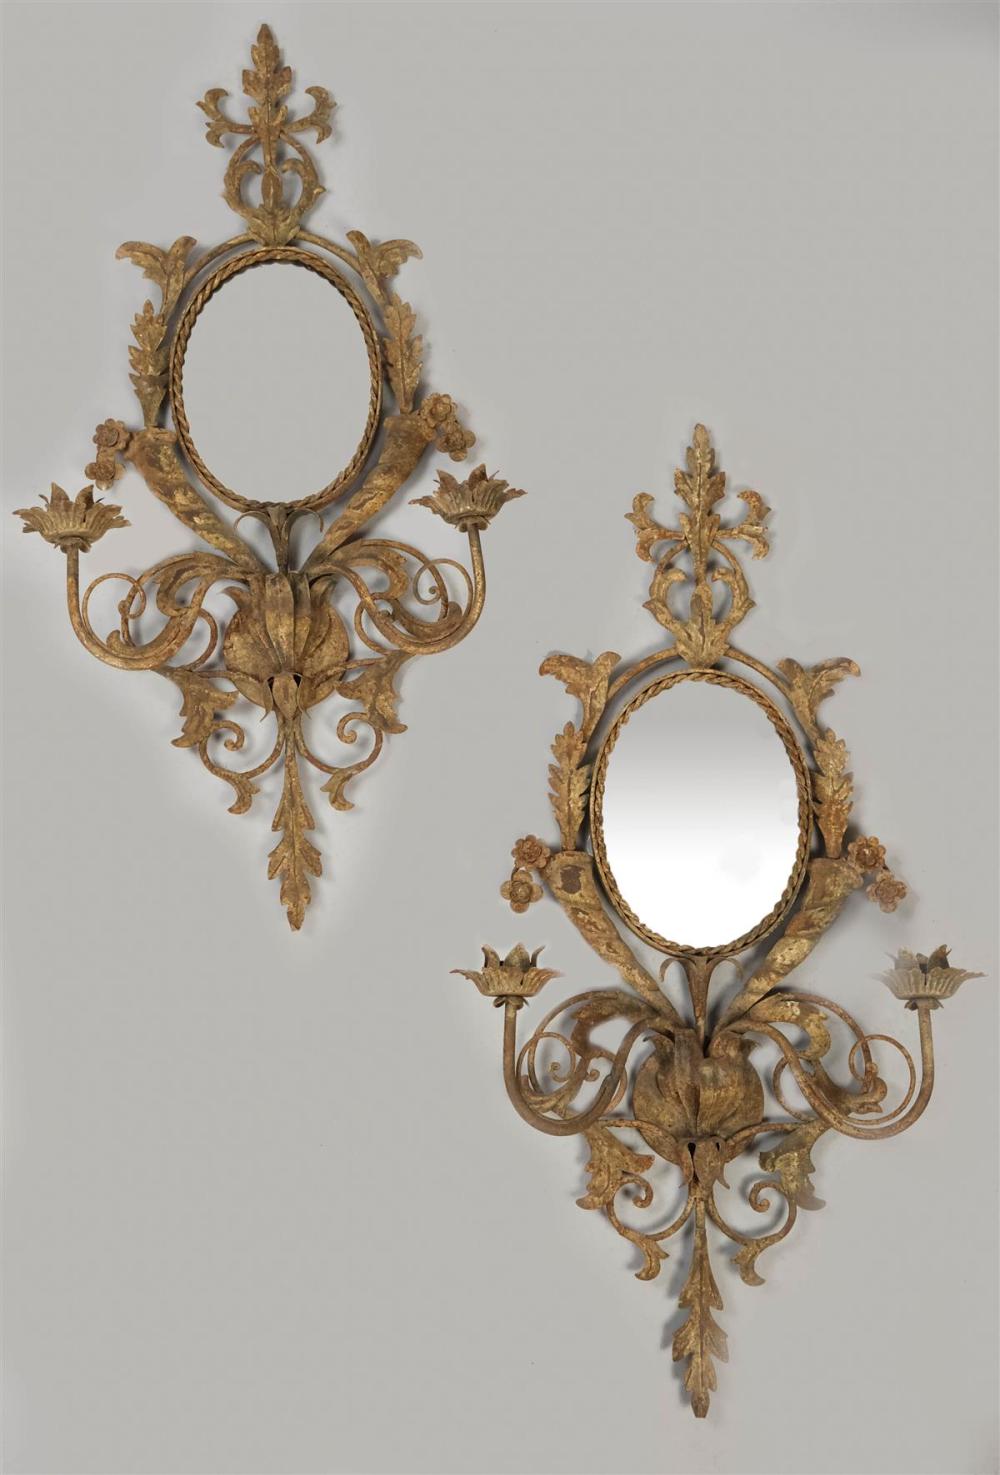 PAIR OF NEOCLASSICAL STYLE METAL 312a45